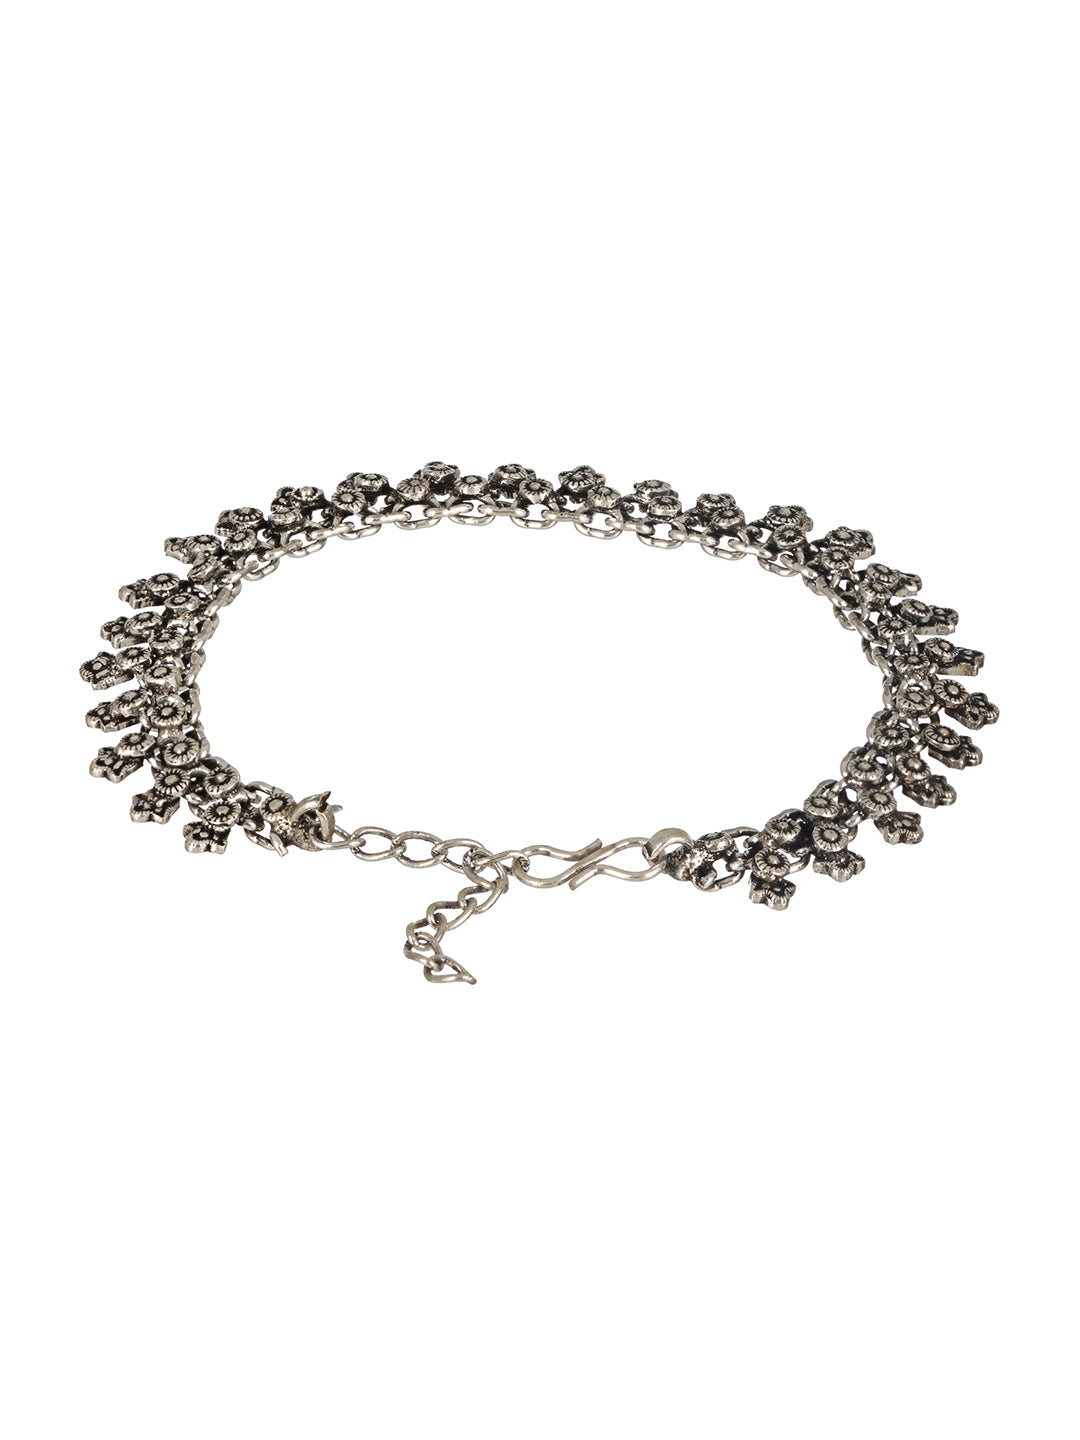 Set of 2 Silver-Plated & Oxidised Handcrafted Anklets - Jazzandsizzle